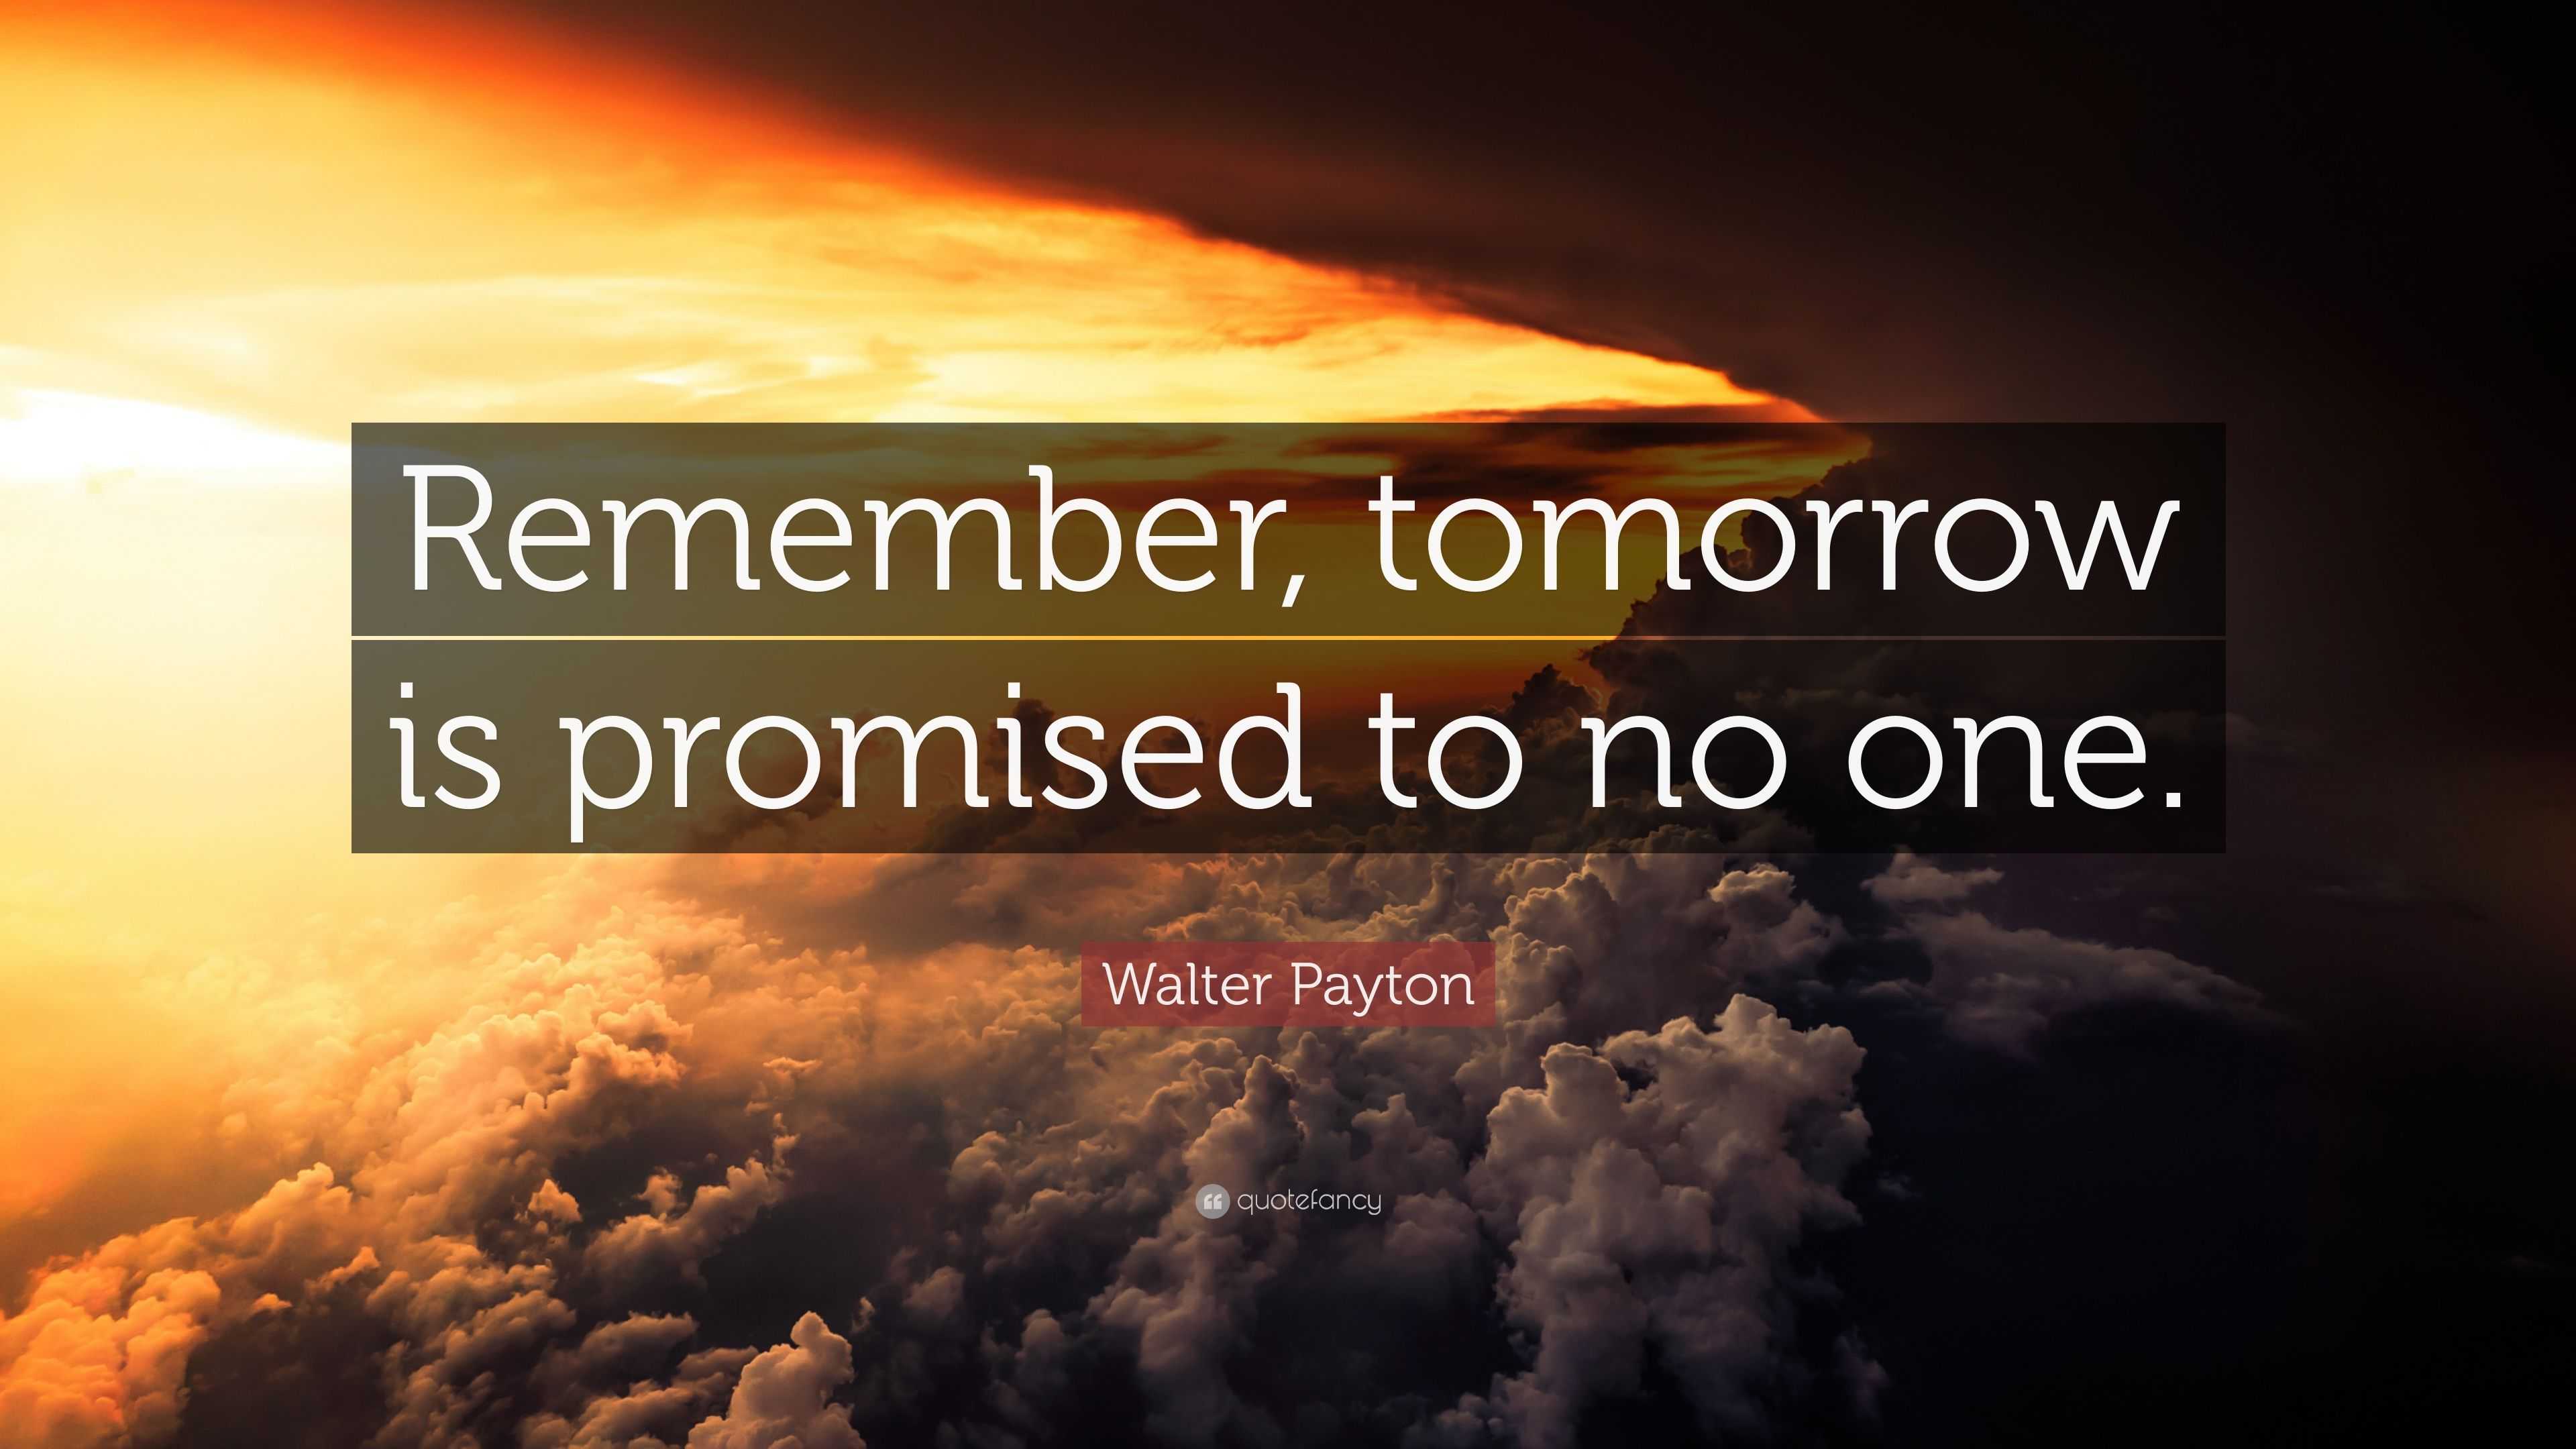 Walter Payton - Remember, tomorrow is promised to no one.